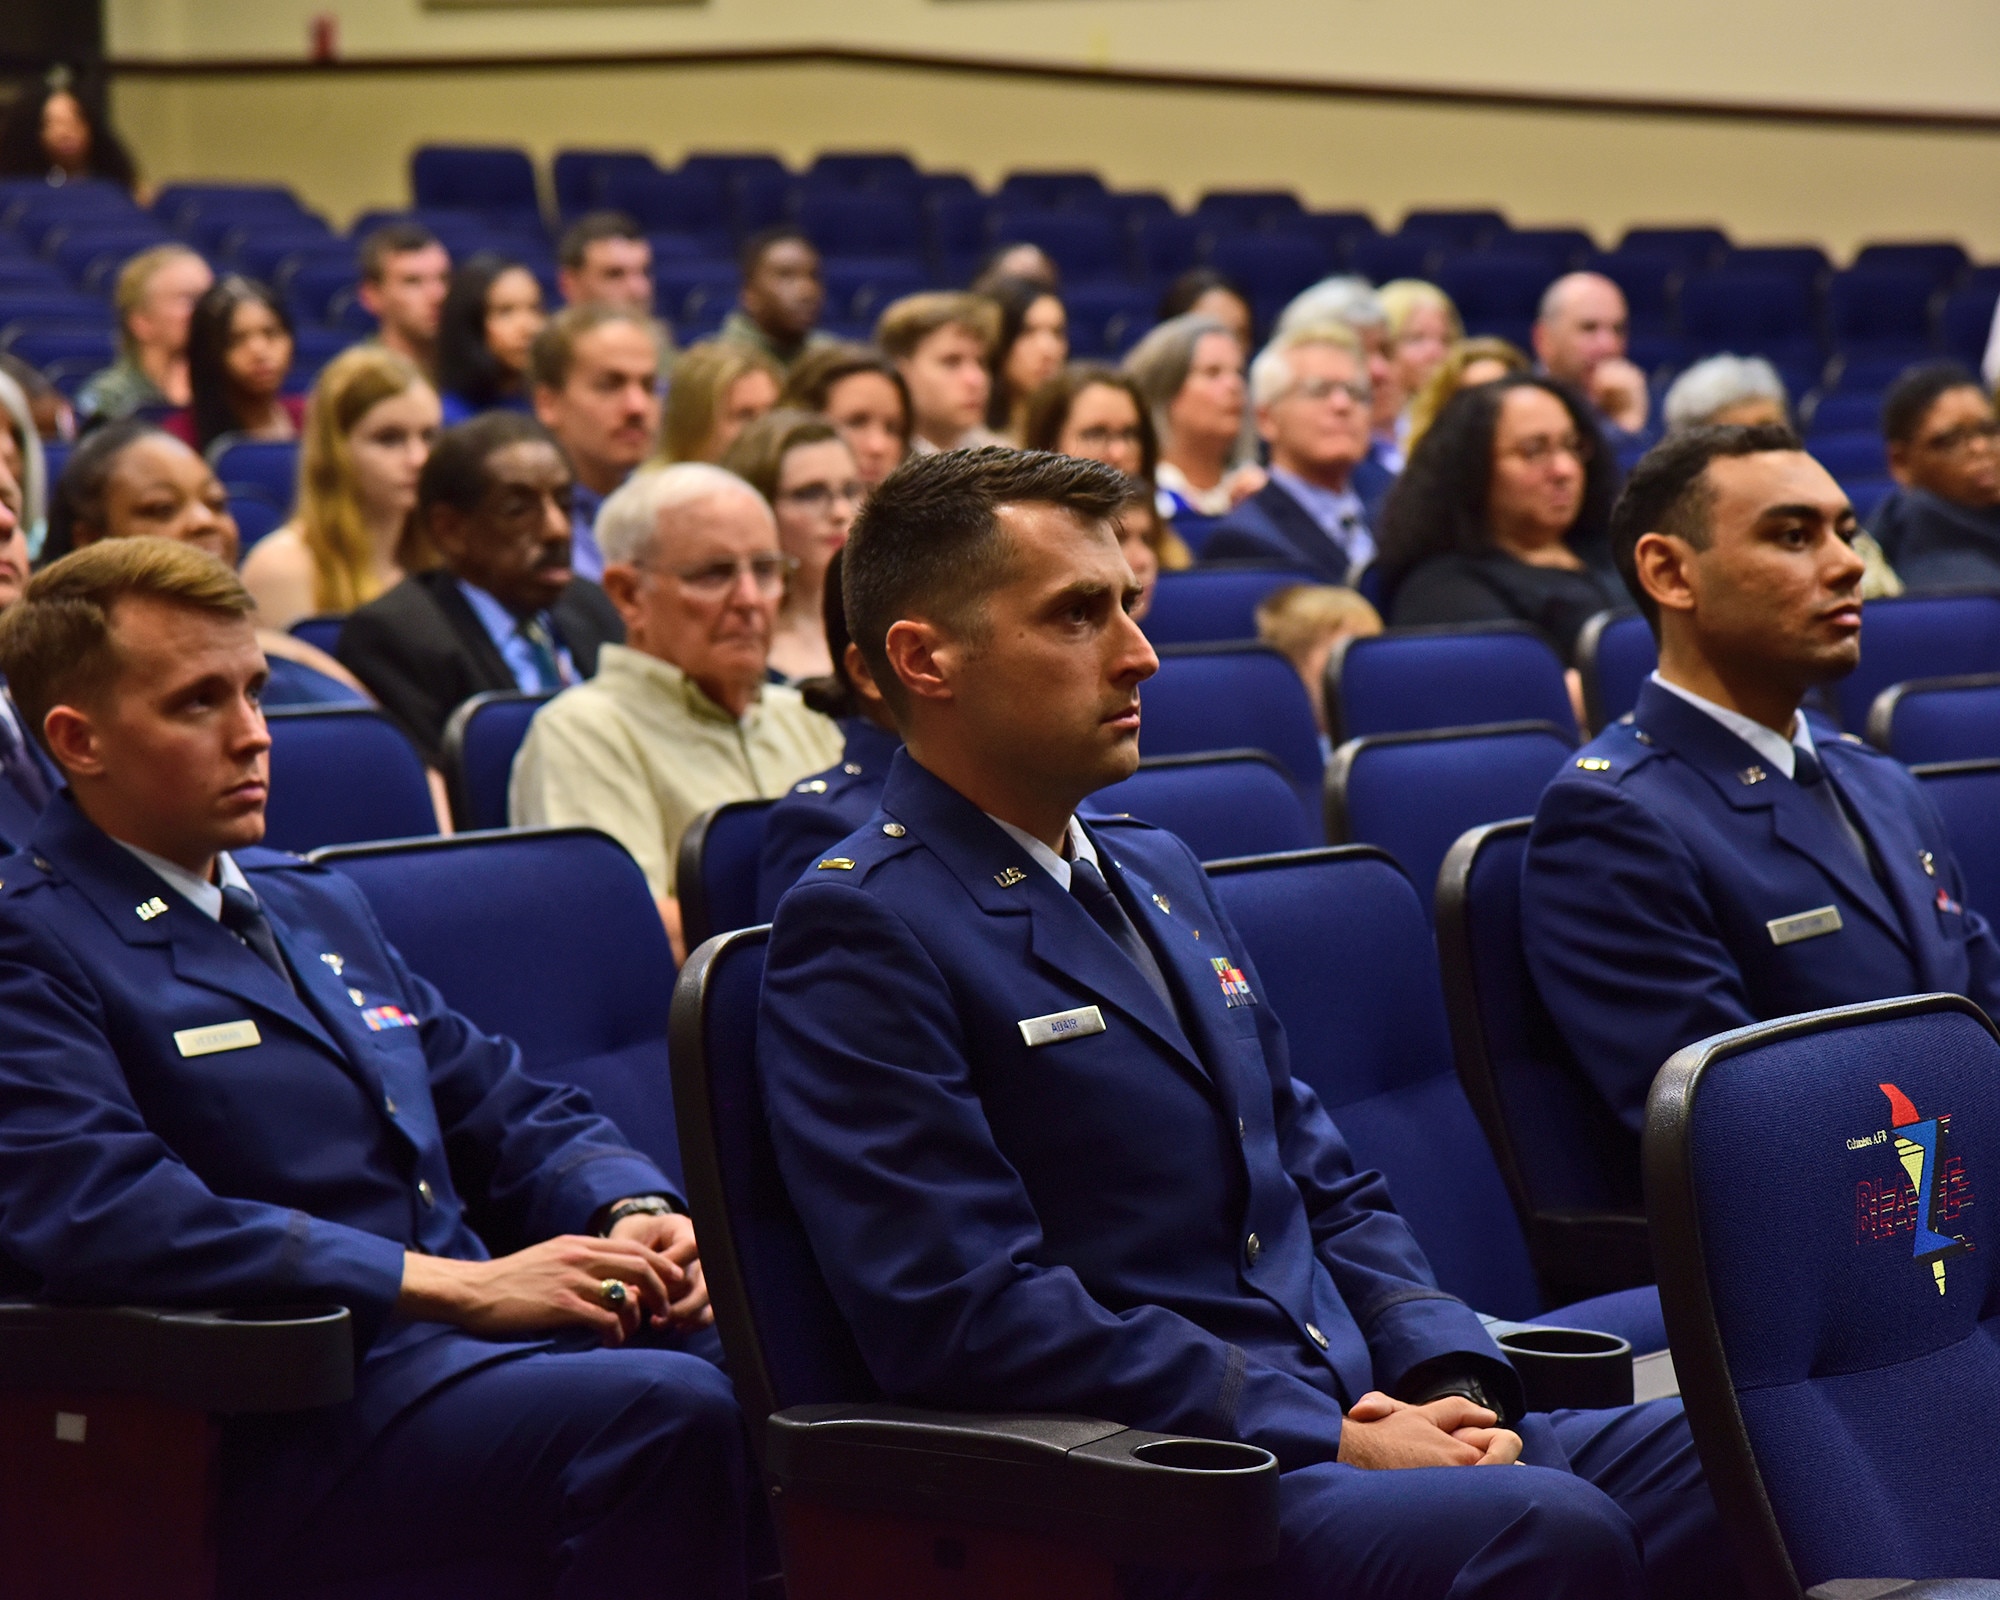 New pilots from UPT 2.5 and family gather for graduation July 22, 2022 at Columbus Air Force Base Miss. Family travel from all over the world to celebrate their pilot on graduation day, as well as tuning in over Facebook live stream.